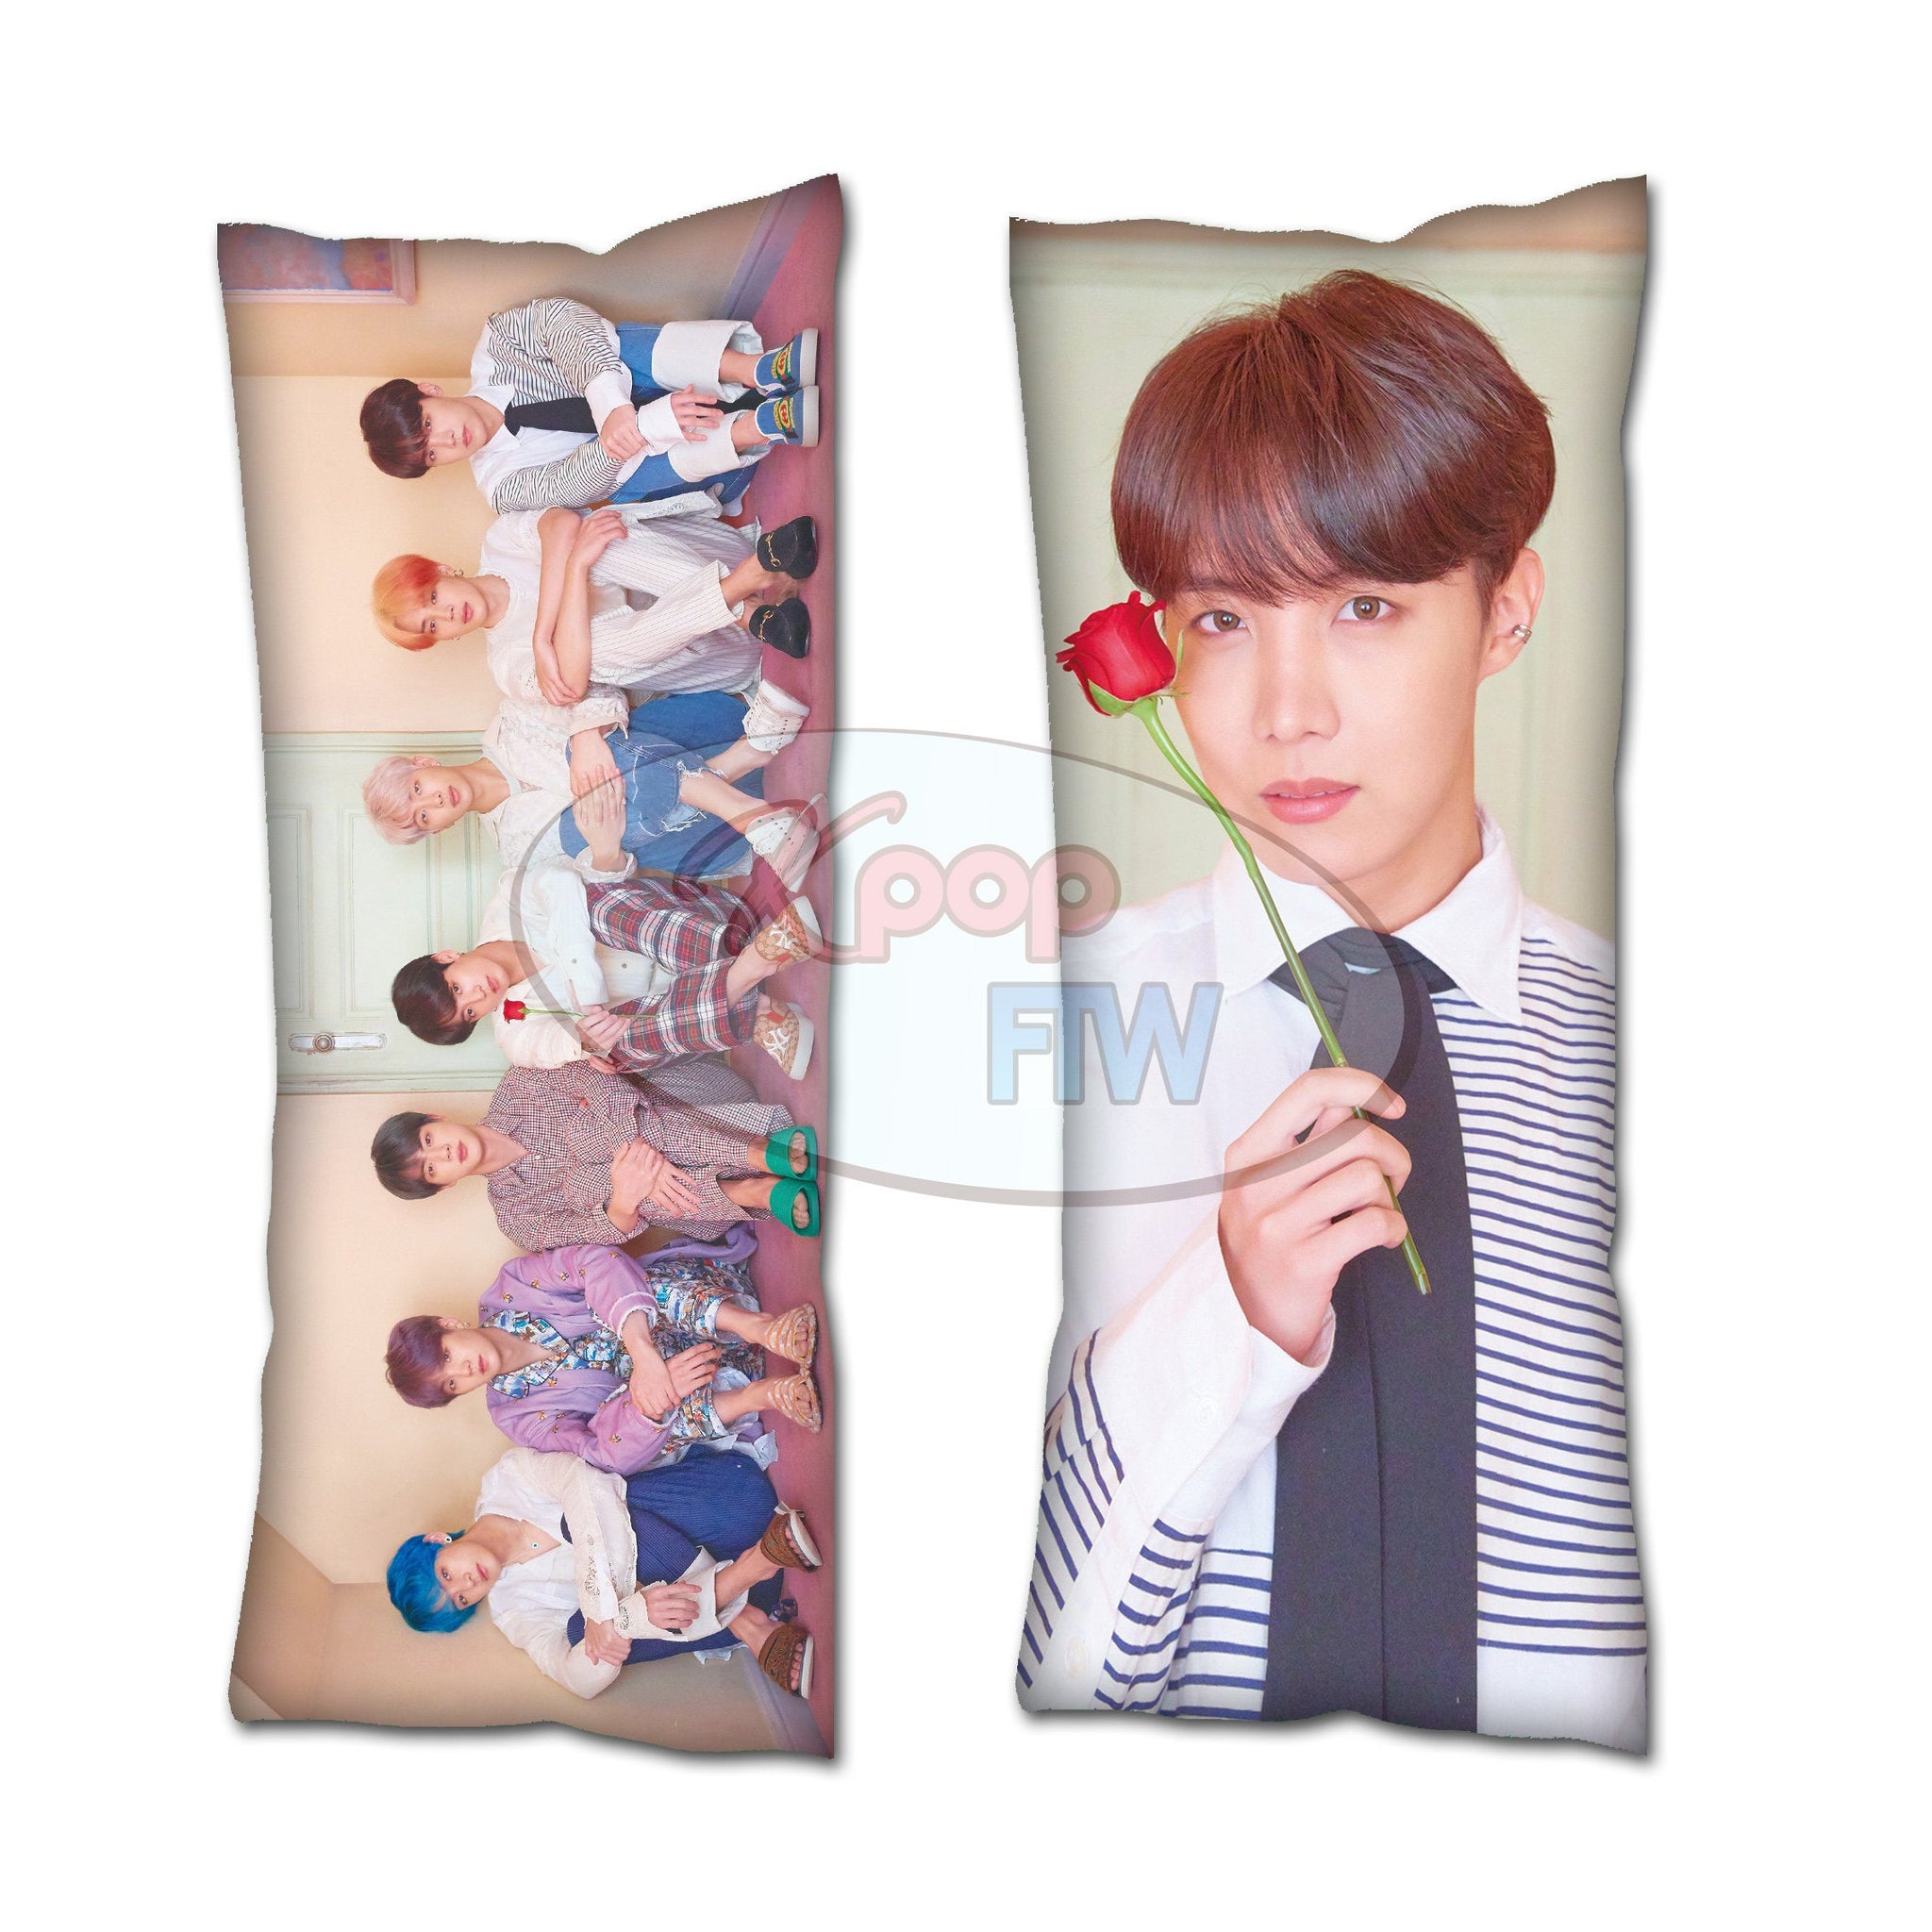 BTS] Map of the Soul: Persona Jhope Body Pillow - Kpop FTW